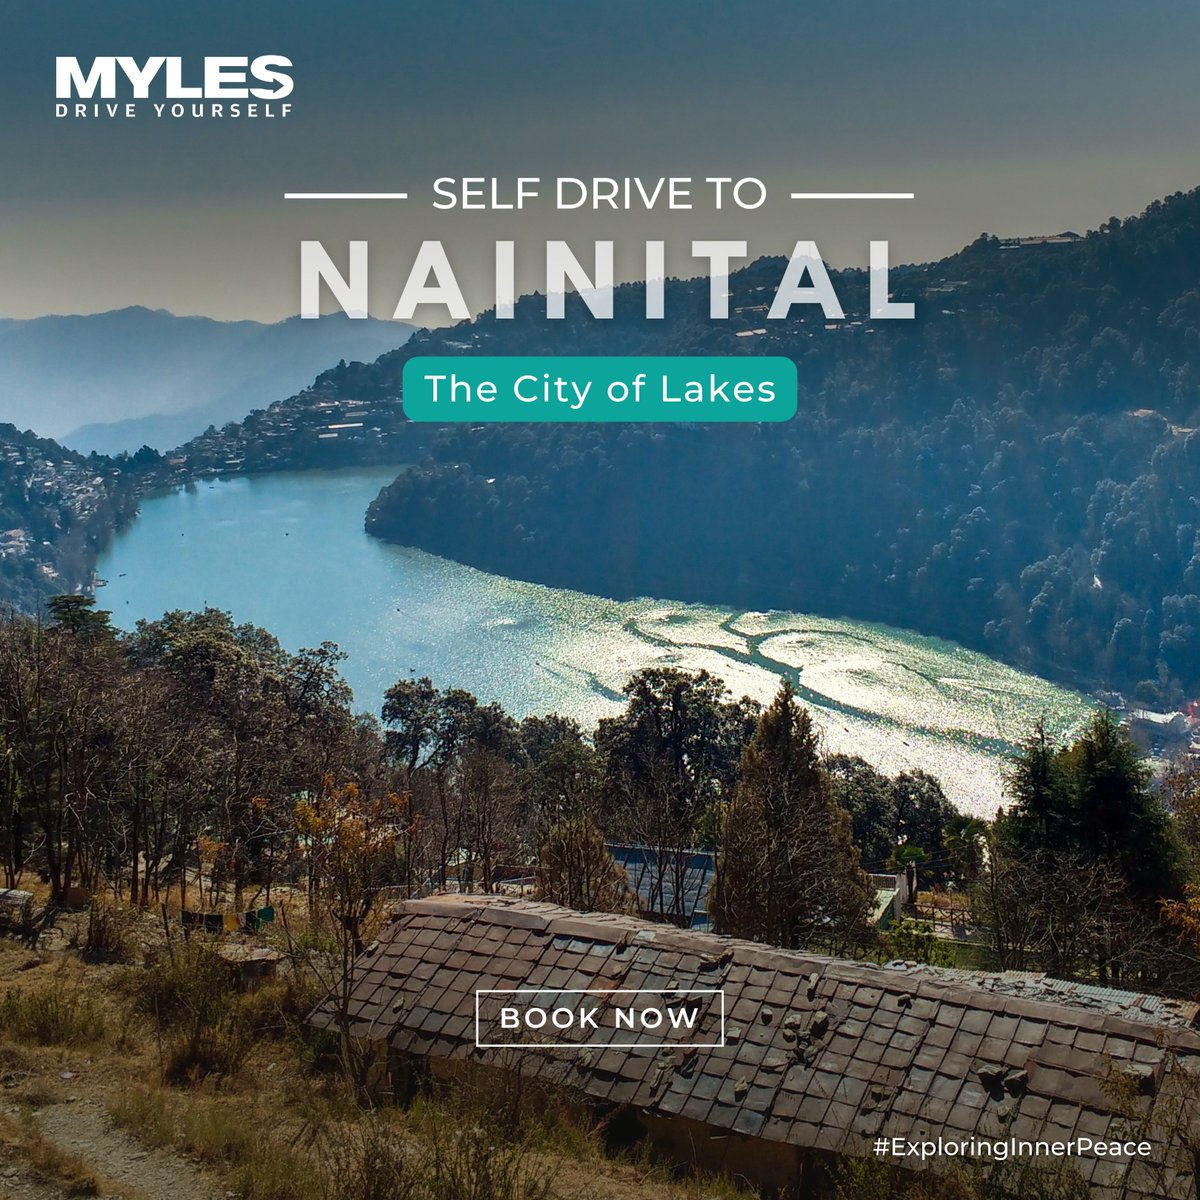 Experience Nature's Wonderland in Nainital with Myles: Drive, Explore, Repeat!😎
#Nainital #Selfdrive #Mylescars
Book Now> bit.ly/43ixJJv
#travel #picoftheday #carsubscription #trendsetter #sustainable #flexible #secondhand #carsoninstagram #carswithoutlimits #carstagram